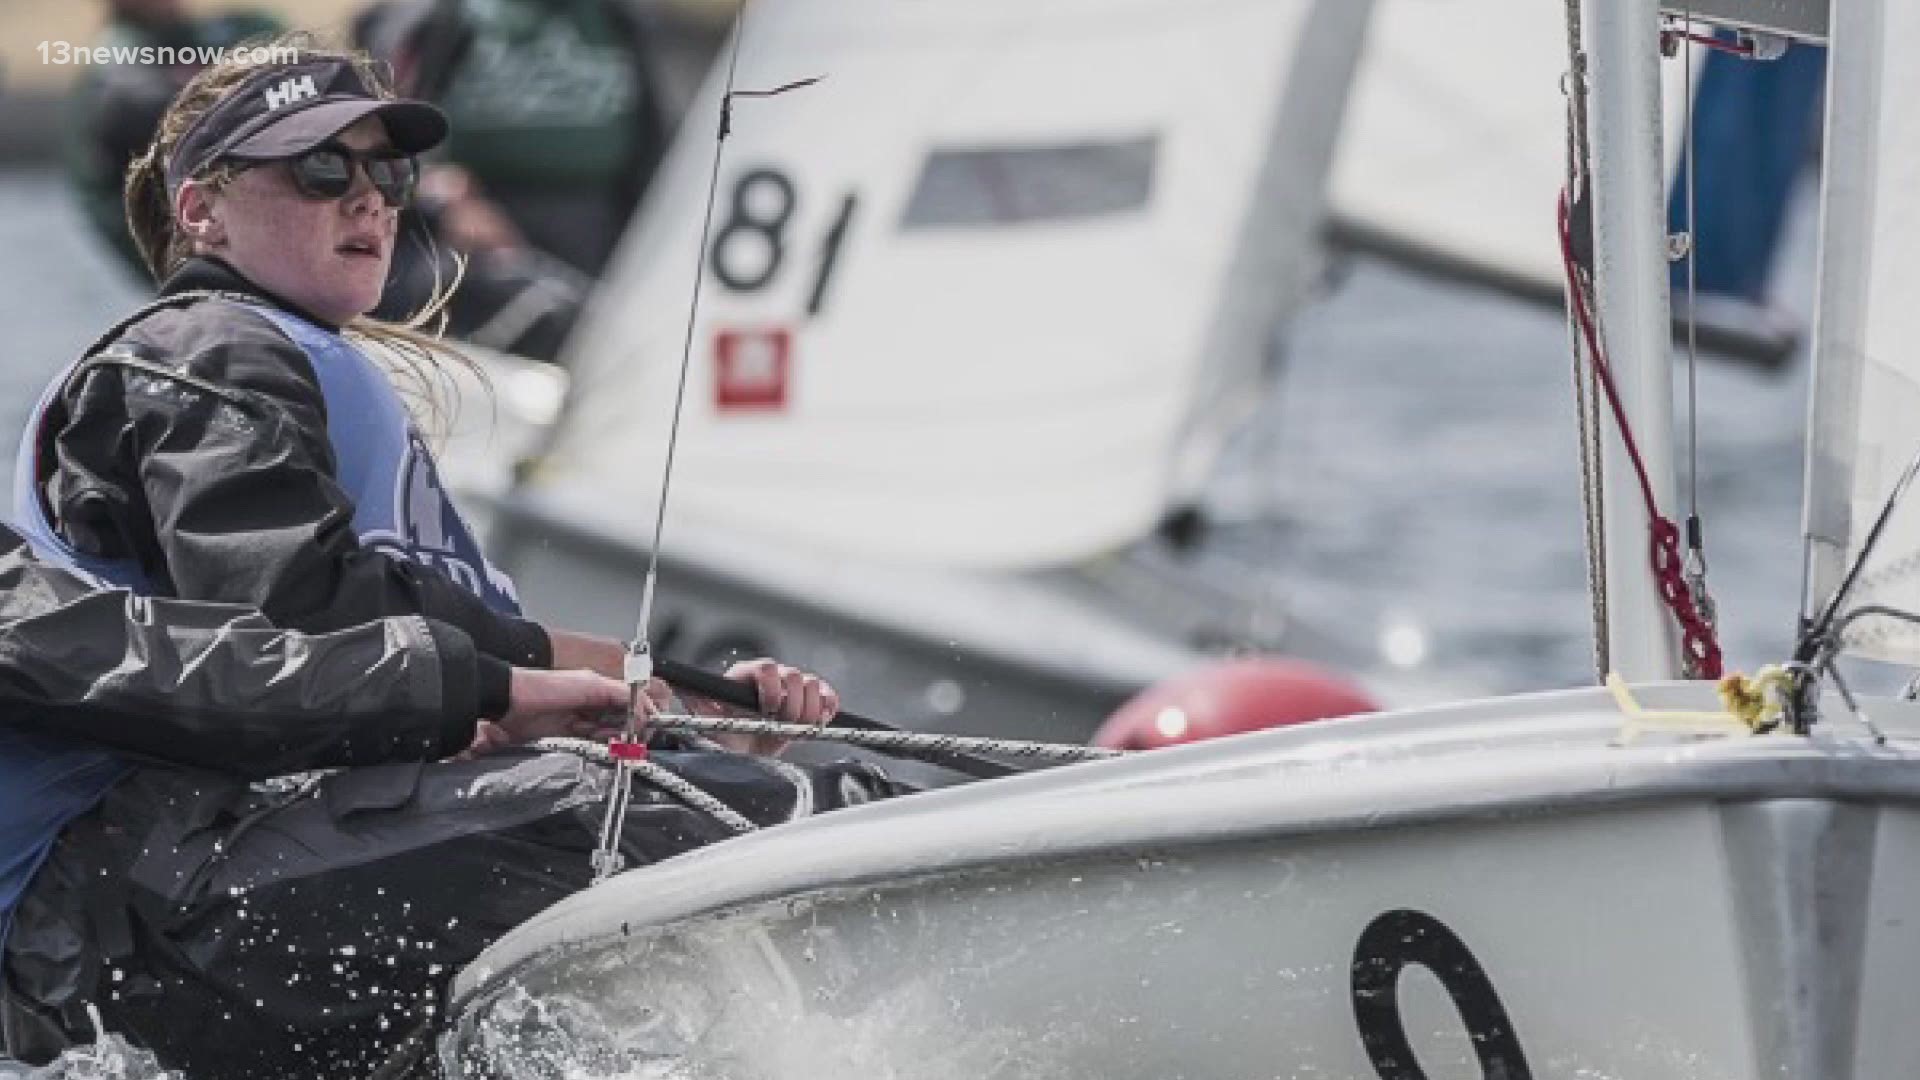 Bridget Groble is the MVP of the ODU sailing team and there's a whole lot more to her story.